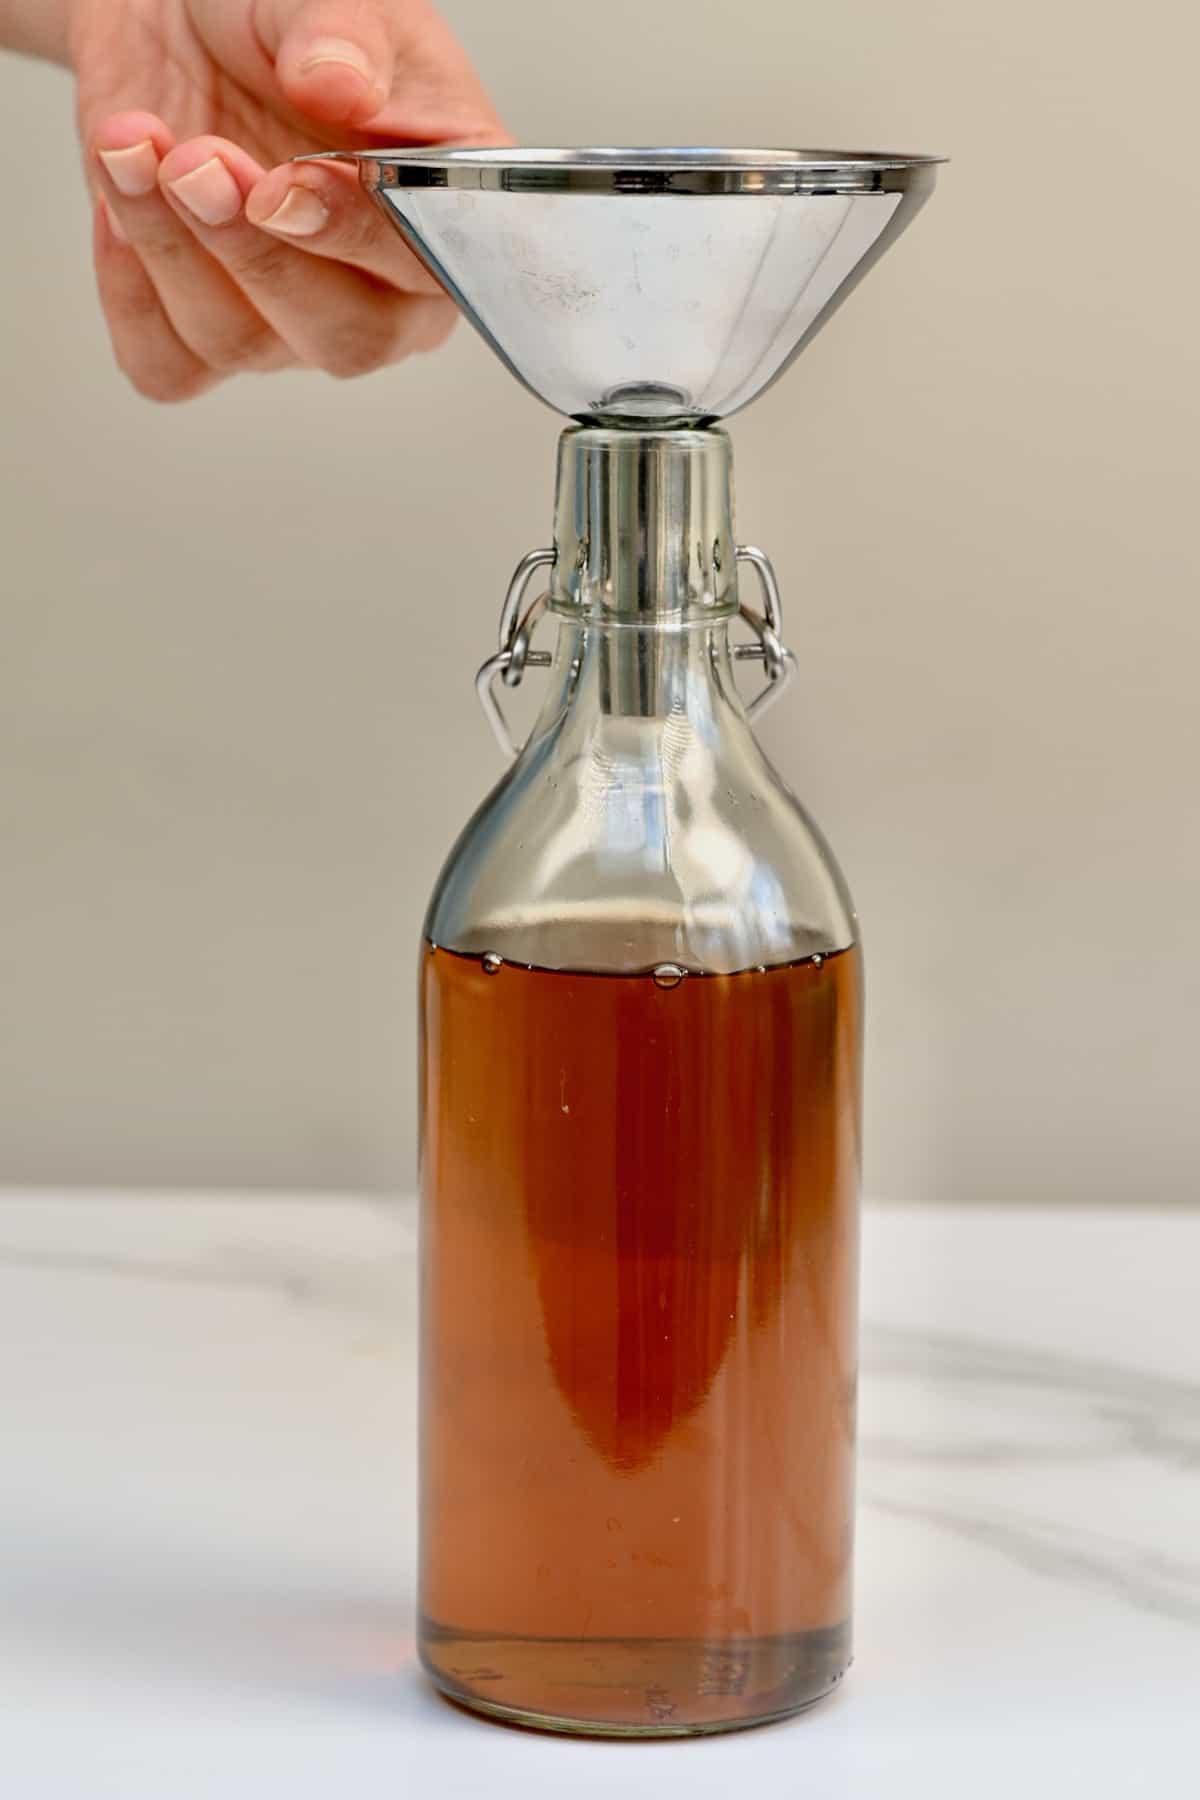 Sugar syrup in a bottle